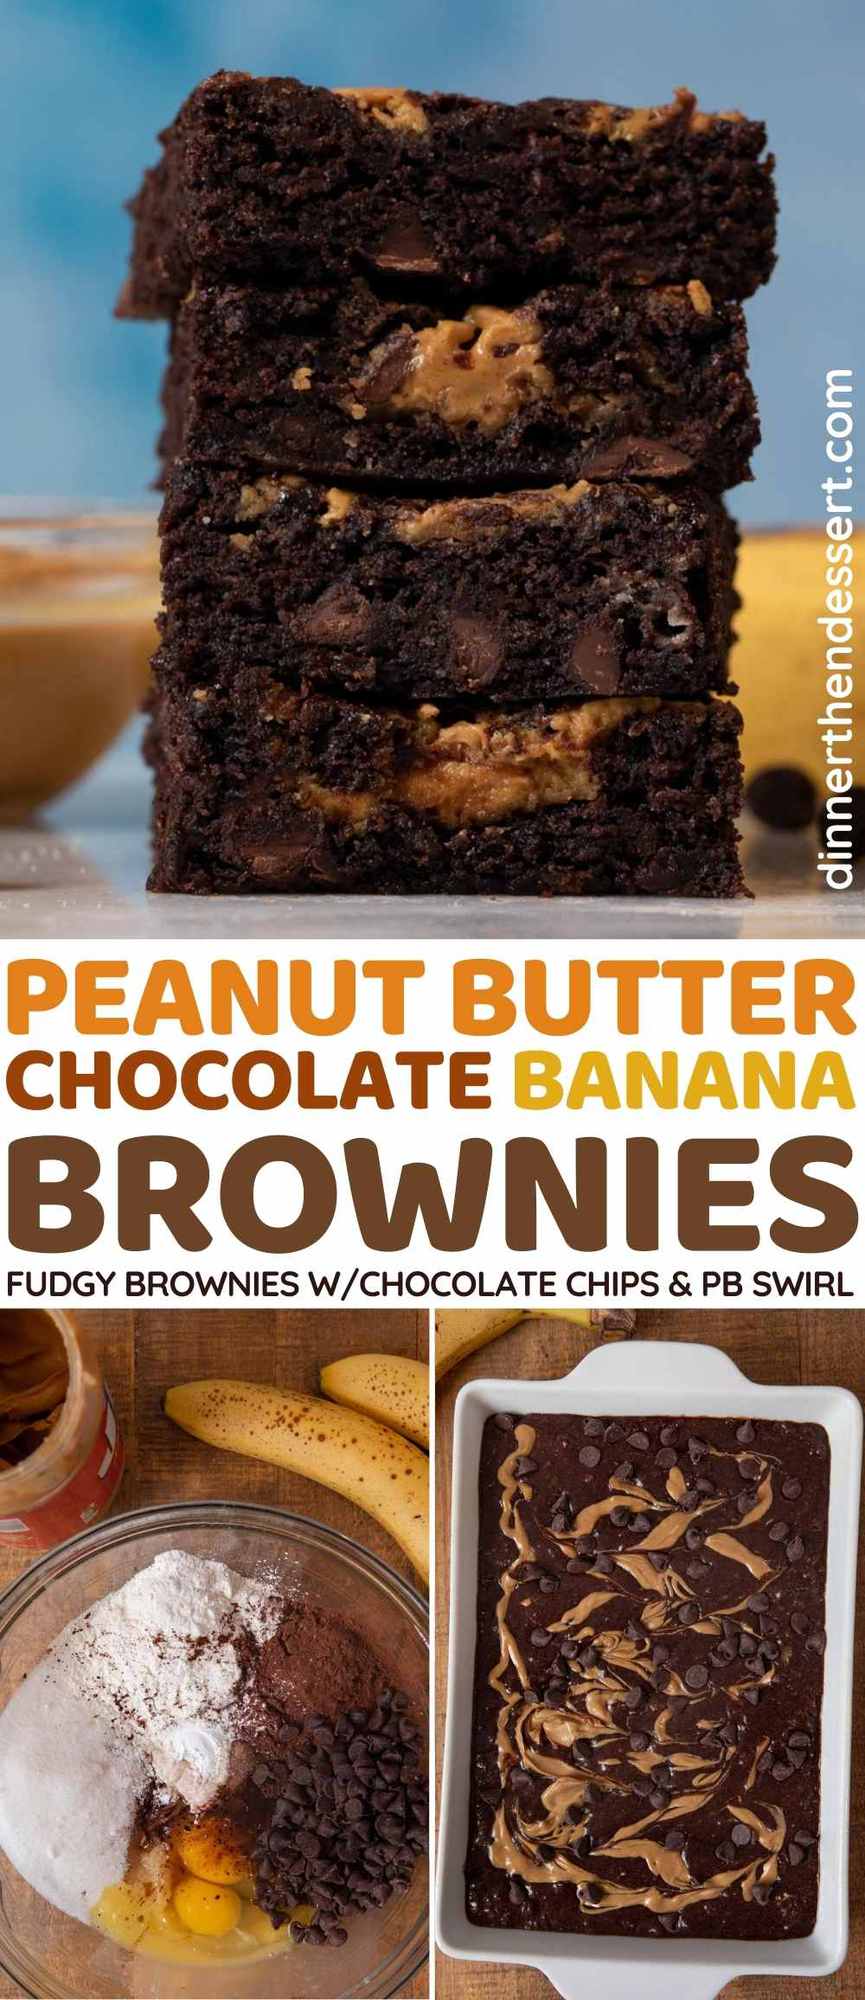 Peanut Butter Chocolate Banana Brownies collage